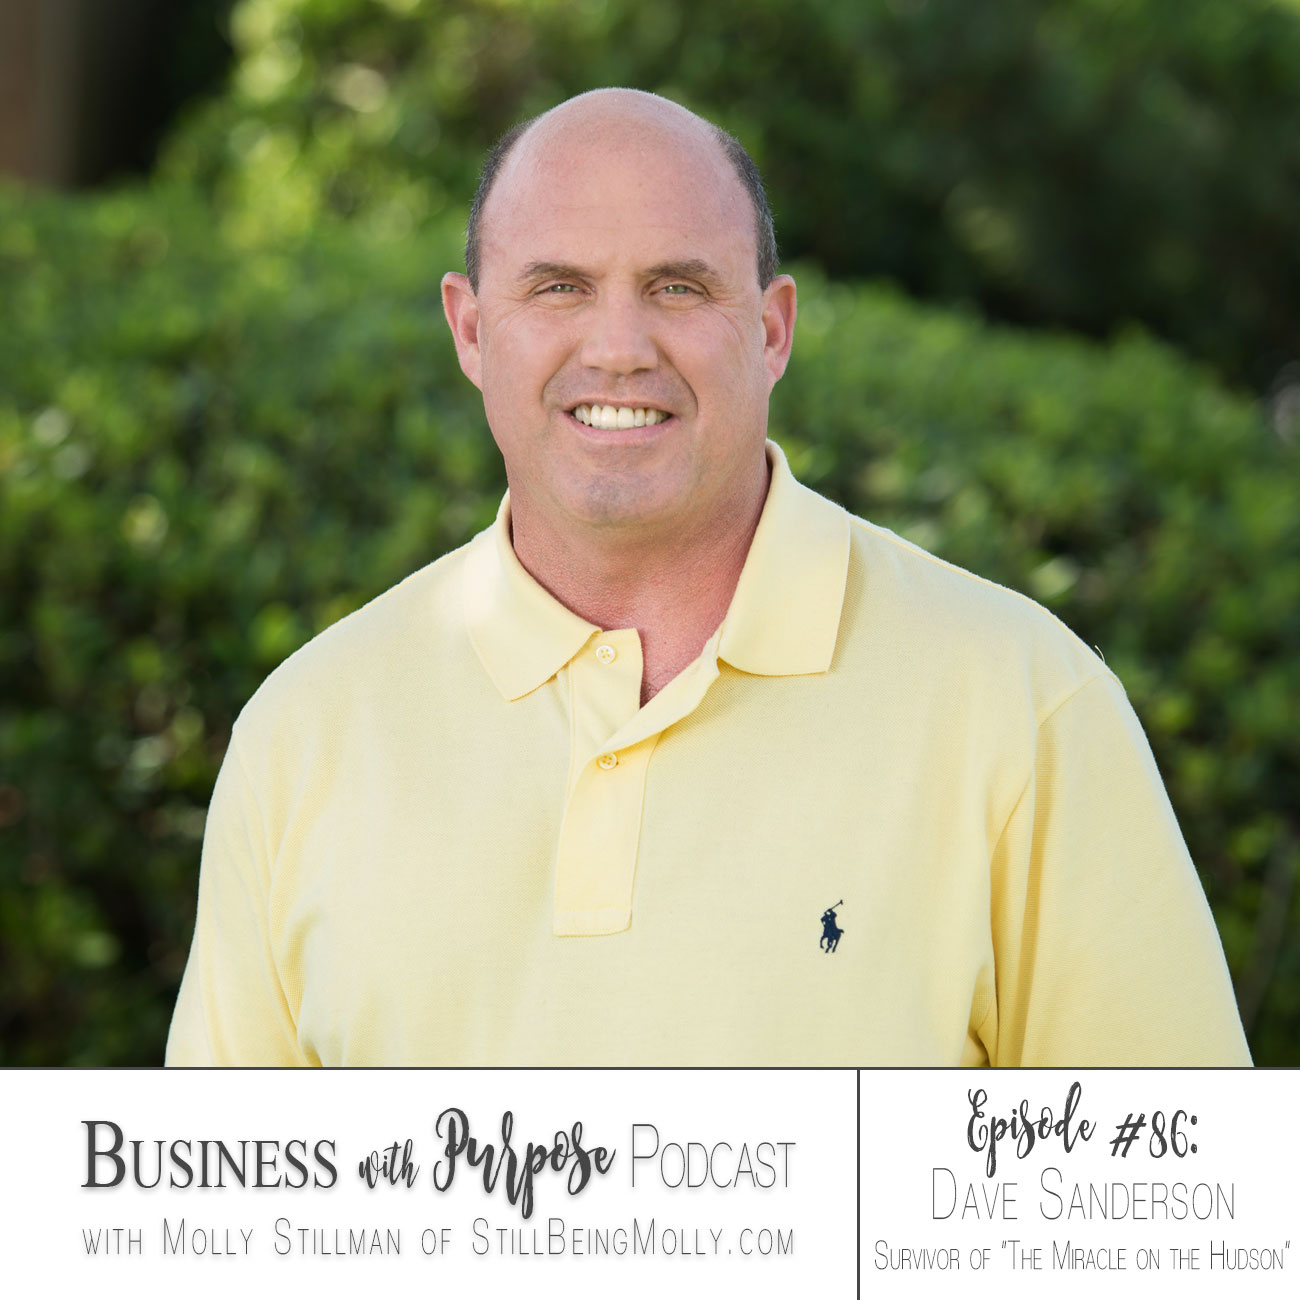 Business with Purpose Podcast EP 86: Dave Sanderson, Survivor of "The Miracle on the Hudson"